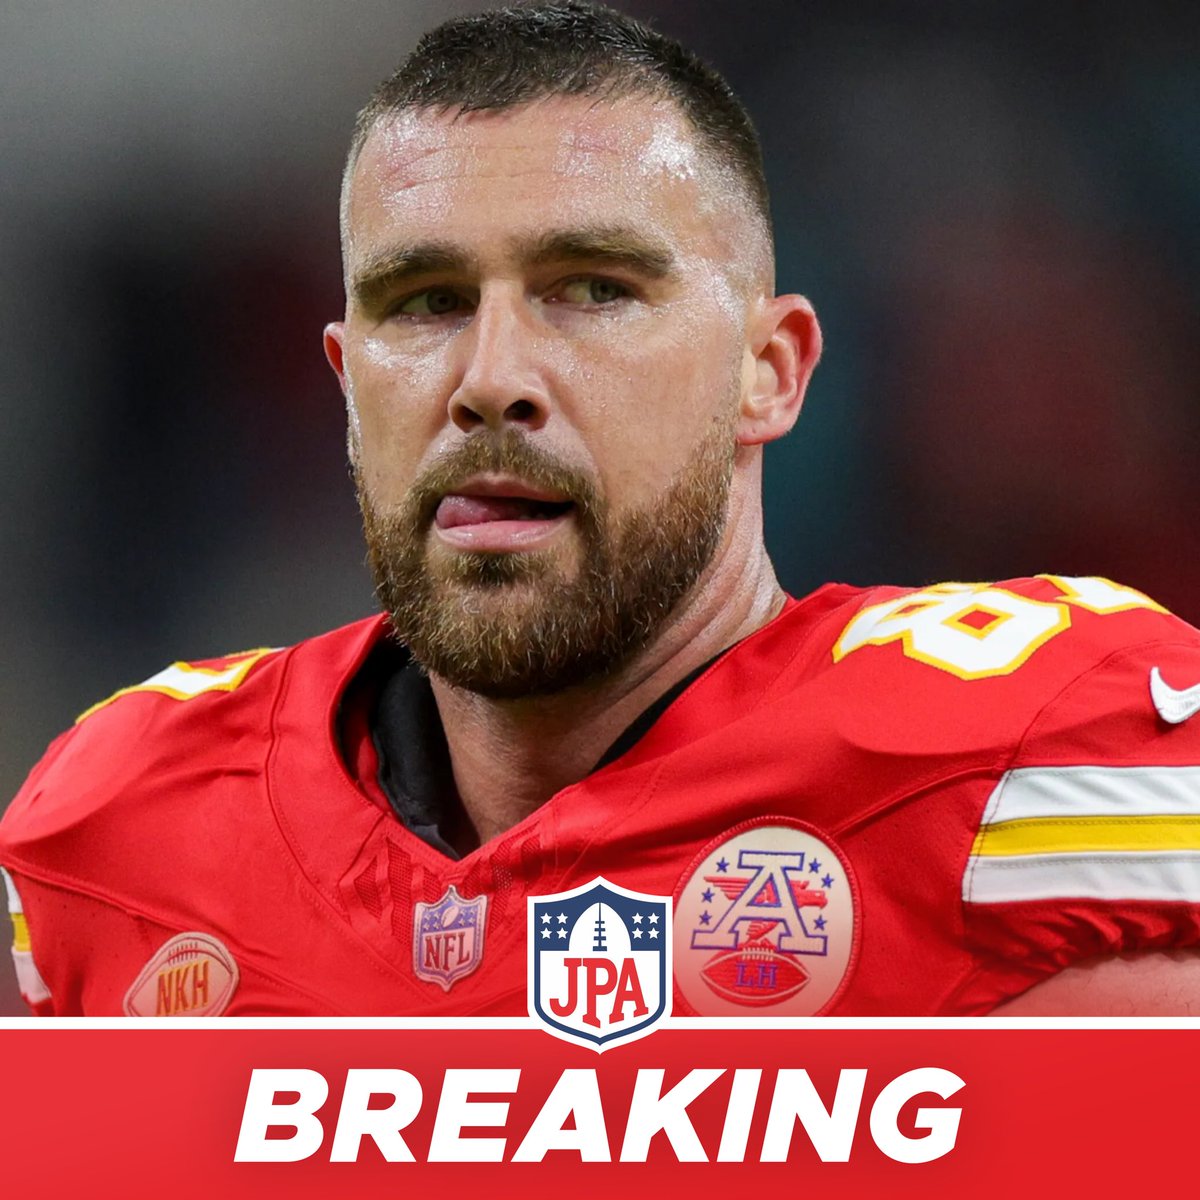 𝗕𝗥𝗘𝗔𝗞𝗜𝗡𝗚: The #Chiefs have signed Star TE Travis Kelce to a 2-year extension that makes him the highest paid TE, per @RapSheet Kelce has been criminally underpaid for awhile.